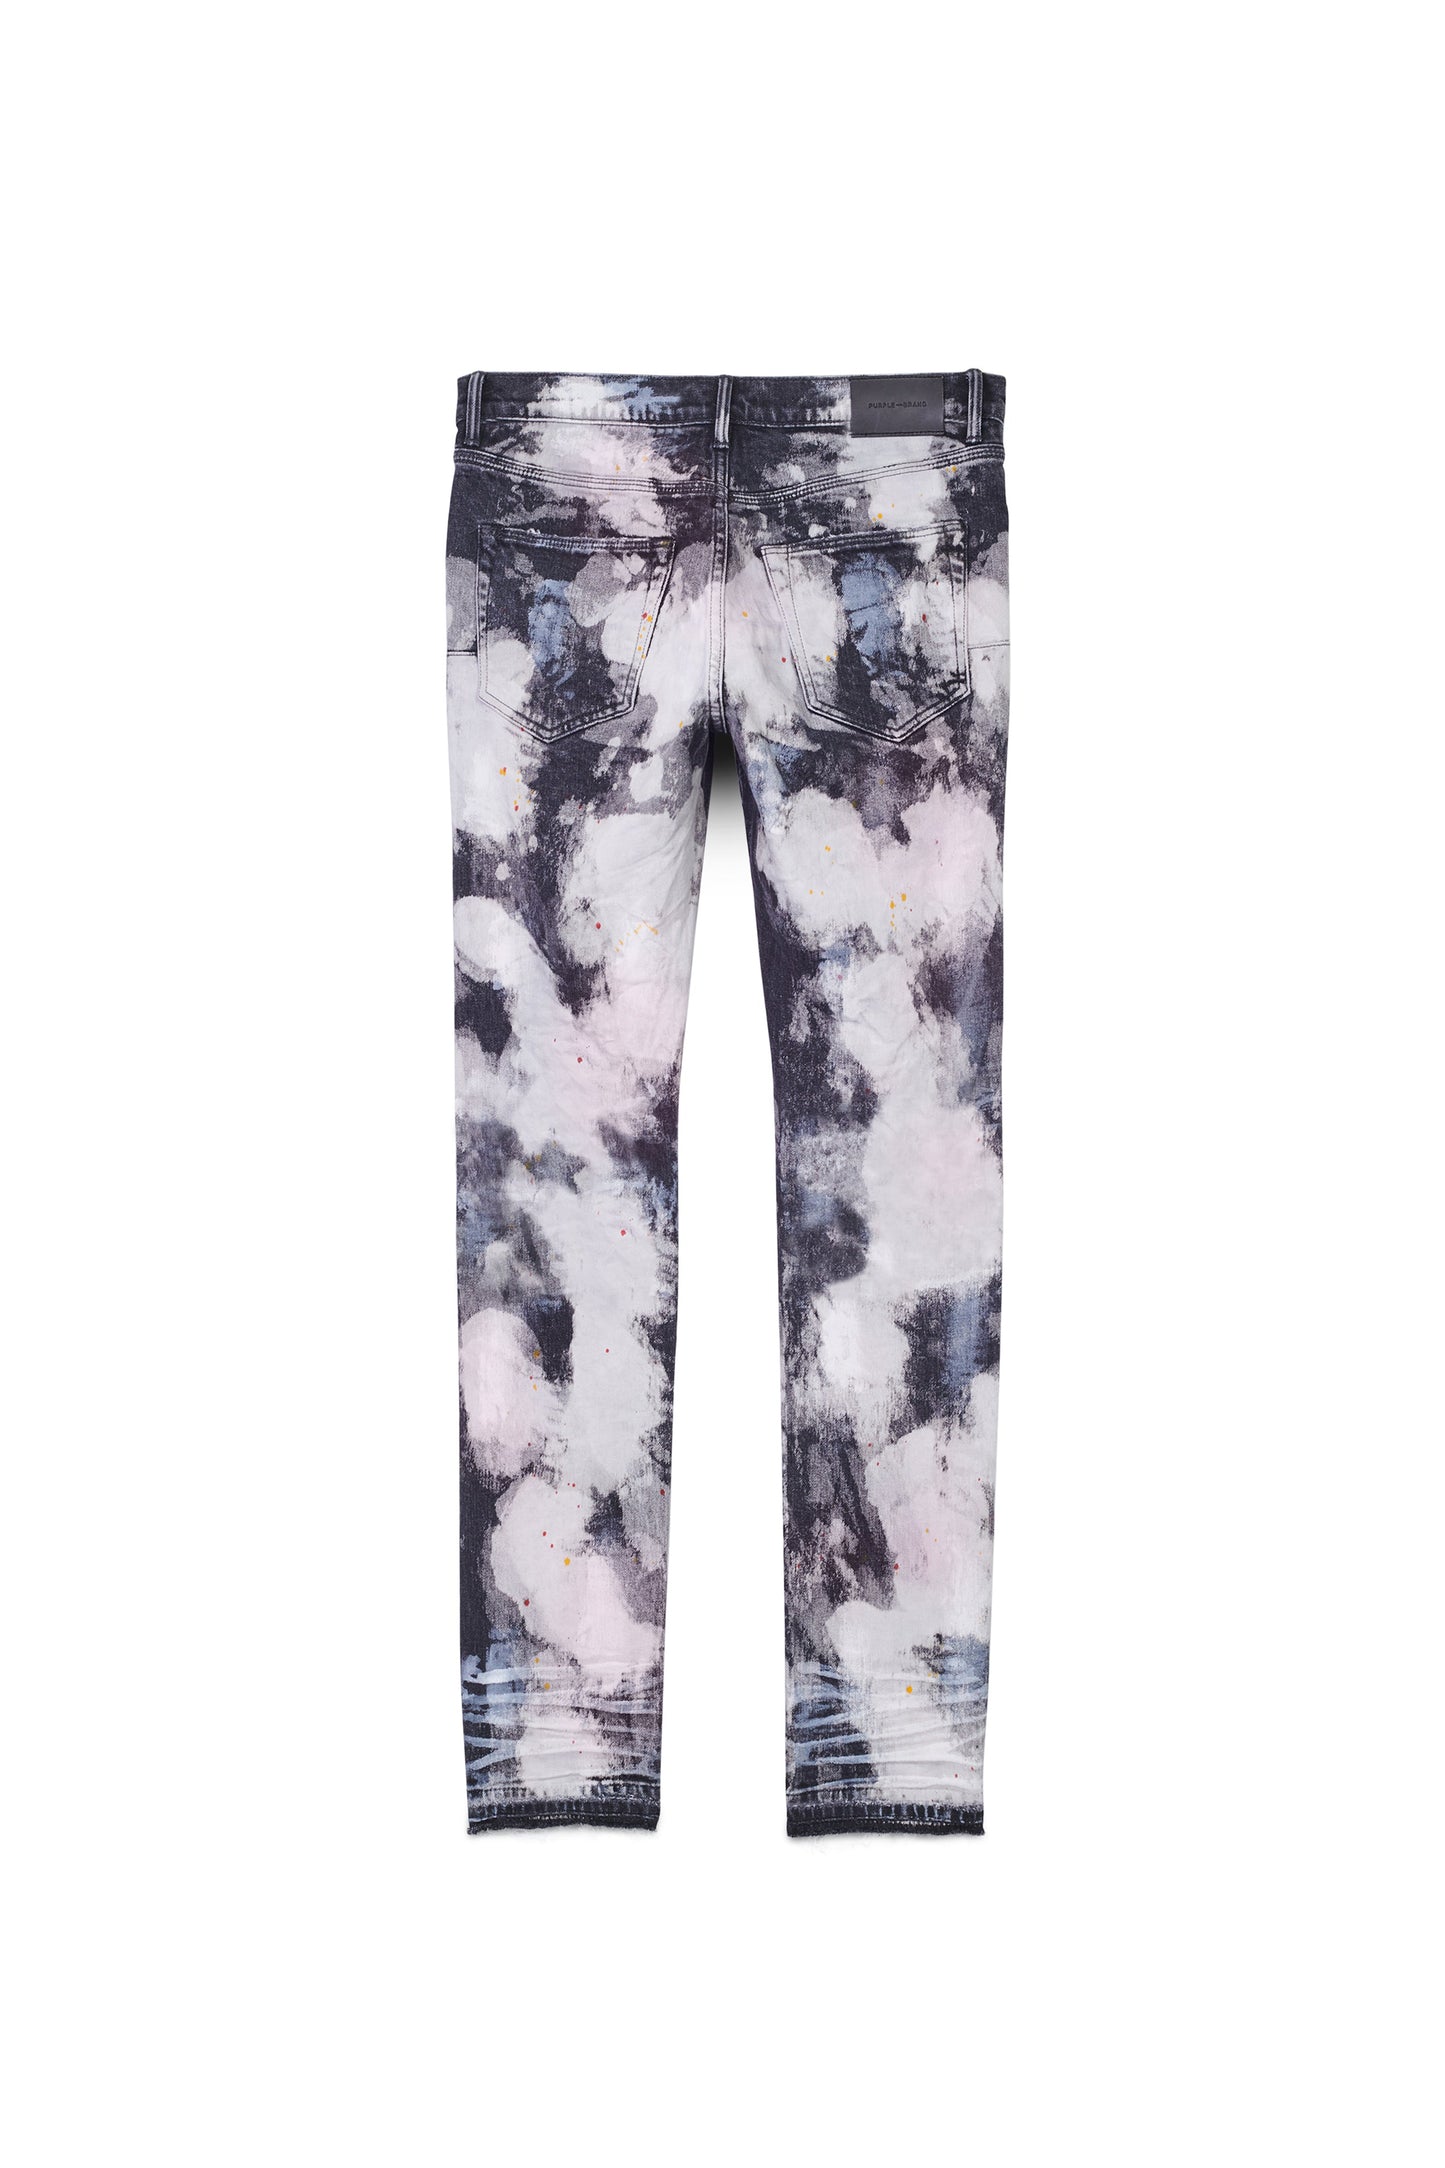 P001 LOW RISE SKINNY JEAN - Black Bleached Out Splatter